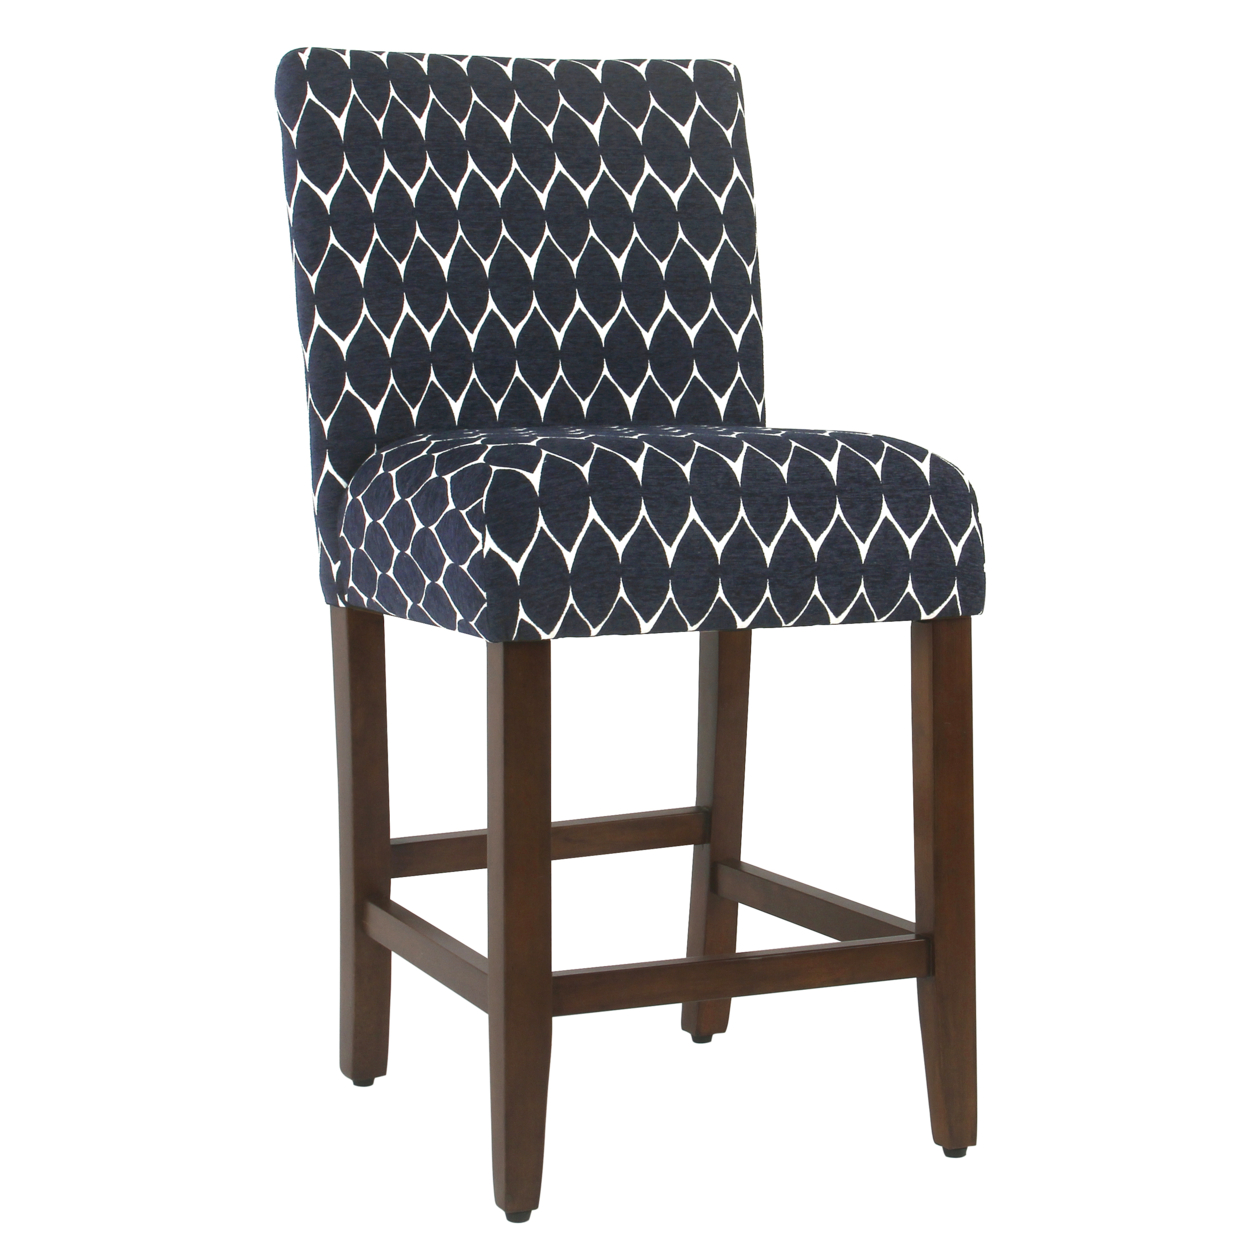 Wooden 24 Inch Counter Height Stool With Geometric Pattern Fabric Upholstery, Blue And White- Saltoro Sherpi